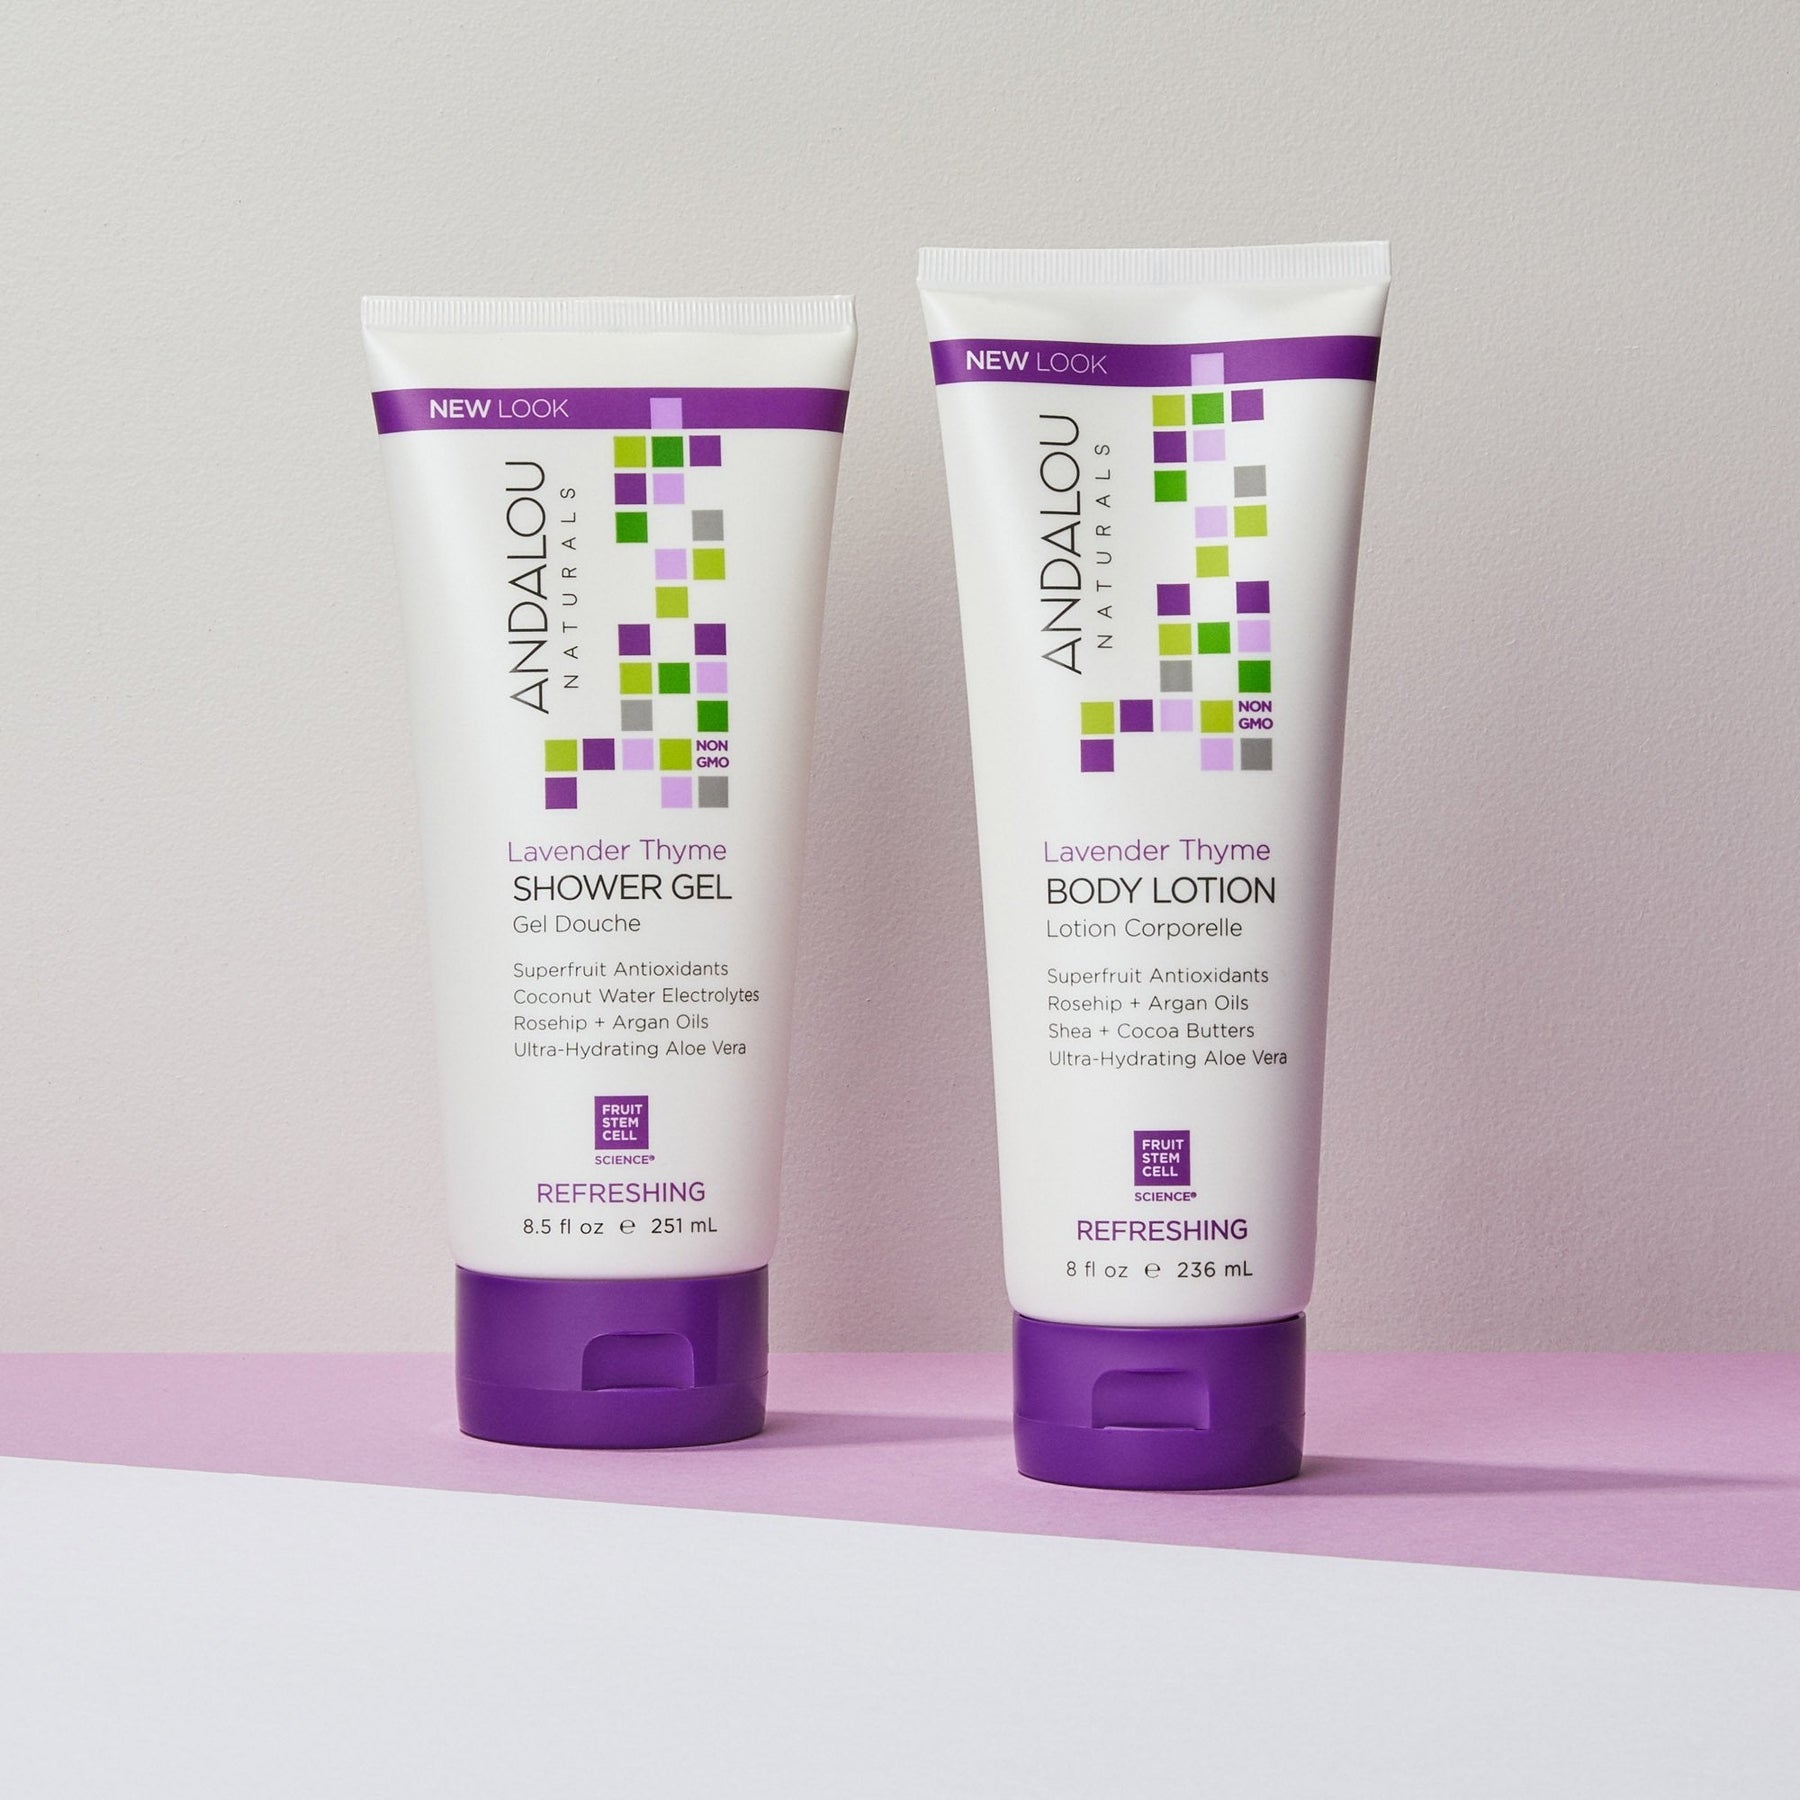 Lavender Thyme Refreshing Body Lotion - by Andalou Naturals |ProCare Outlet|